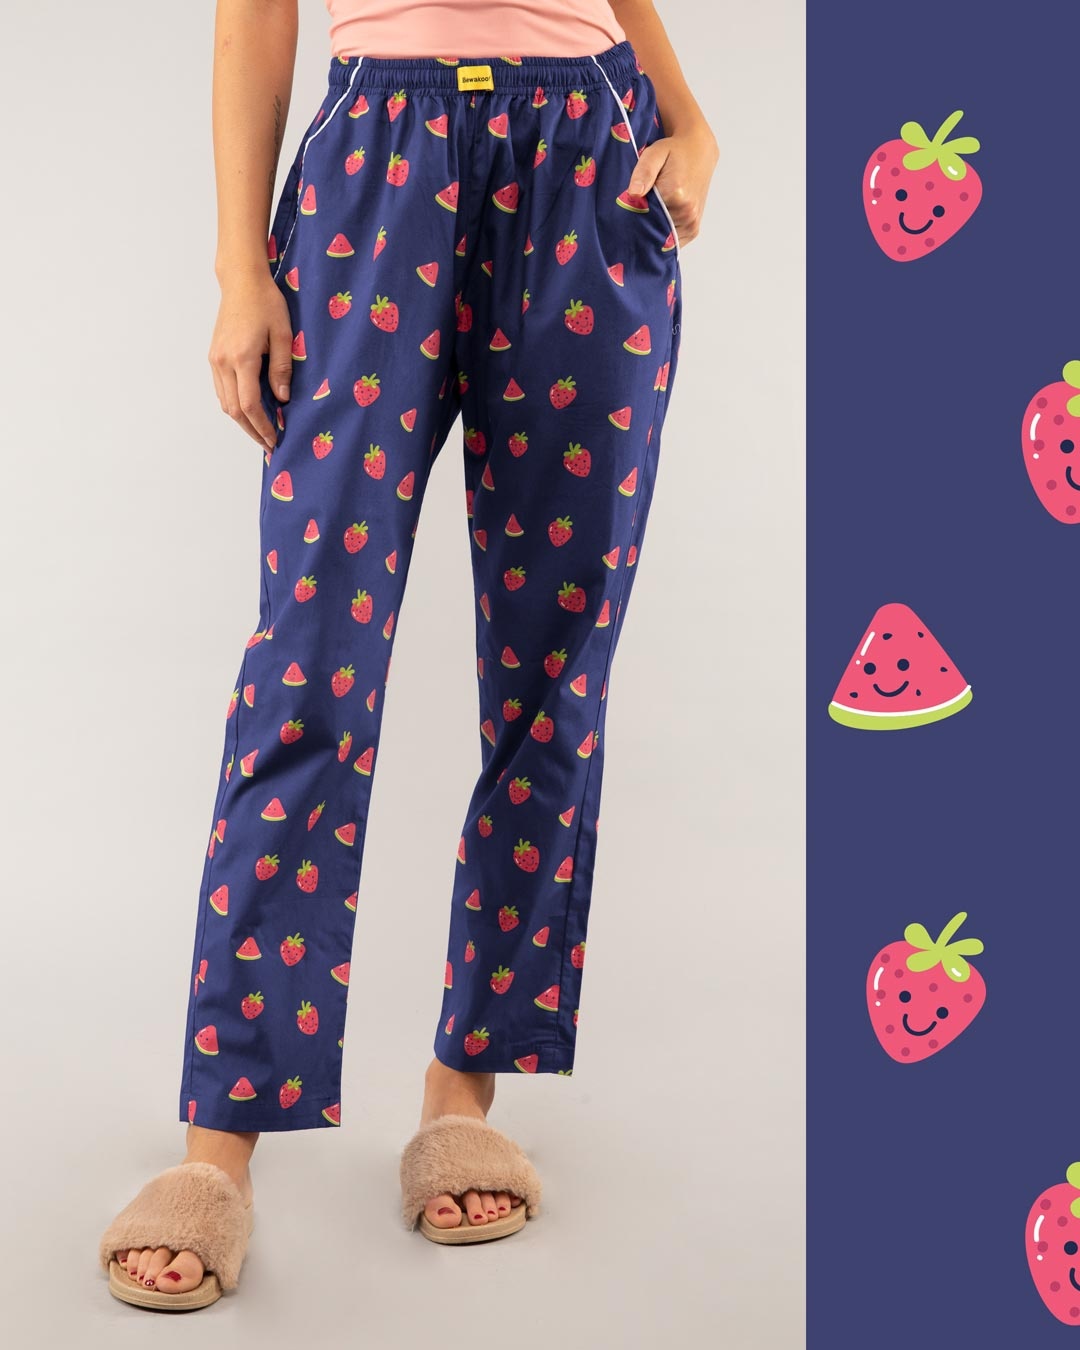 Shop Melon & Berries All Over Printed Pyjama-Front